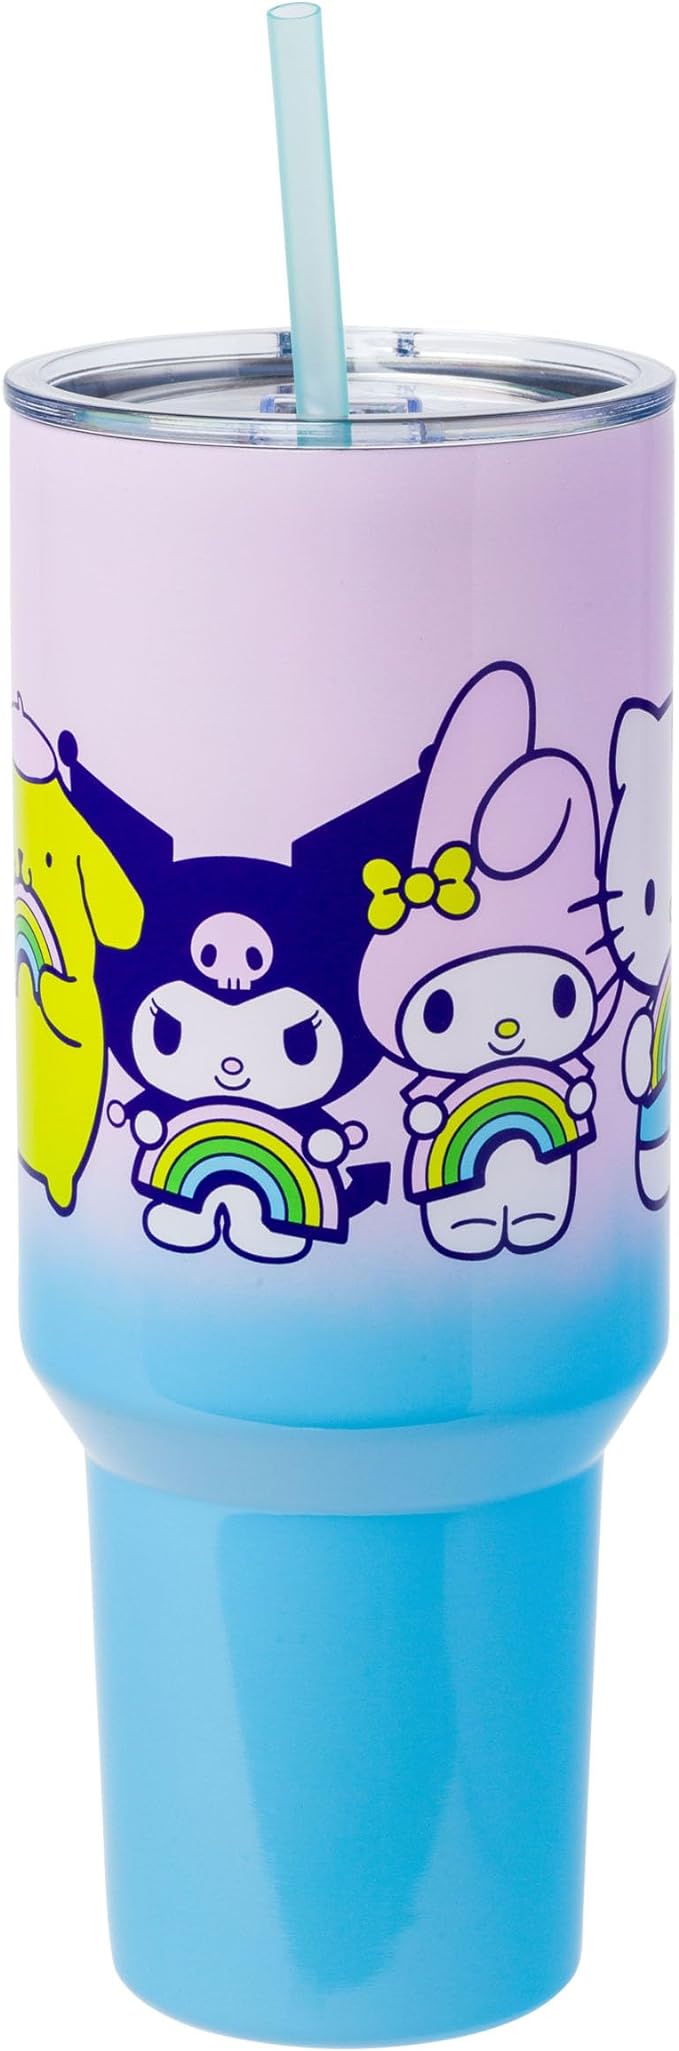 Sanrio Hello Kitty and Friends 40oz Stainless Steel Tumbler with Handle and Straw